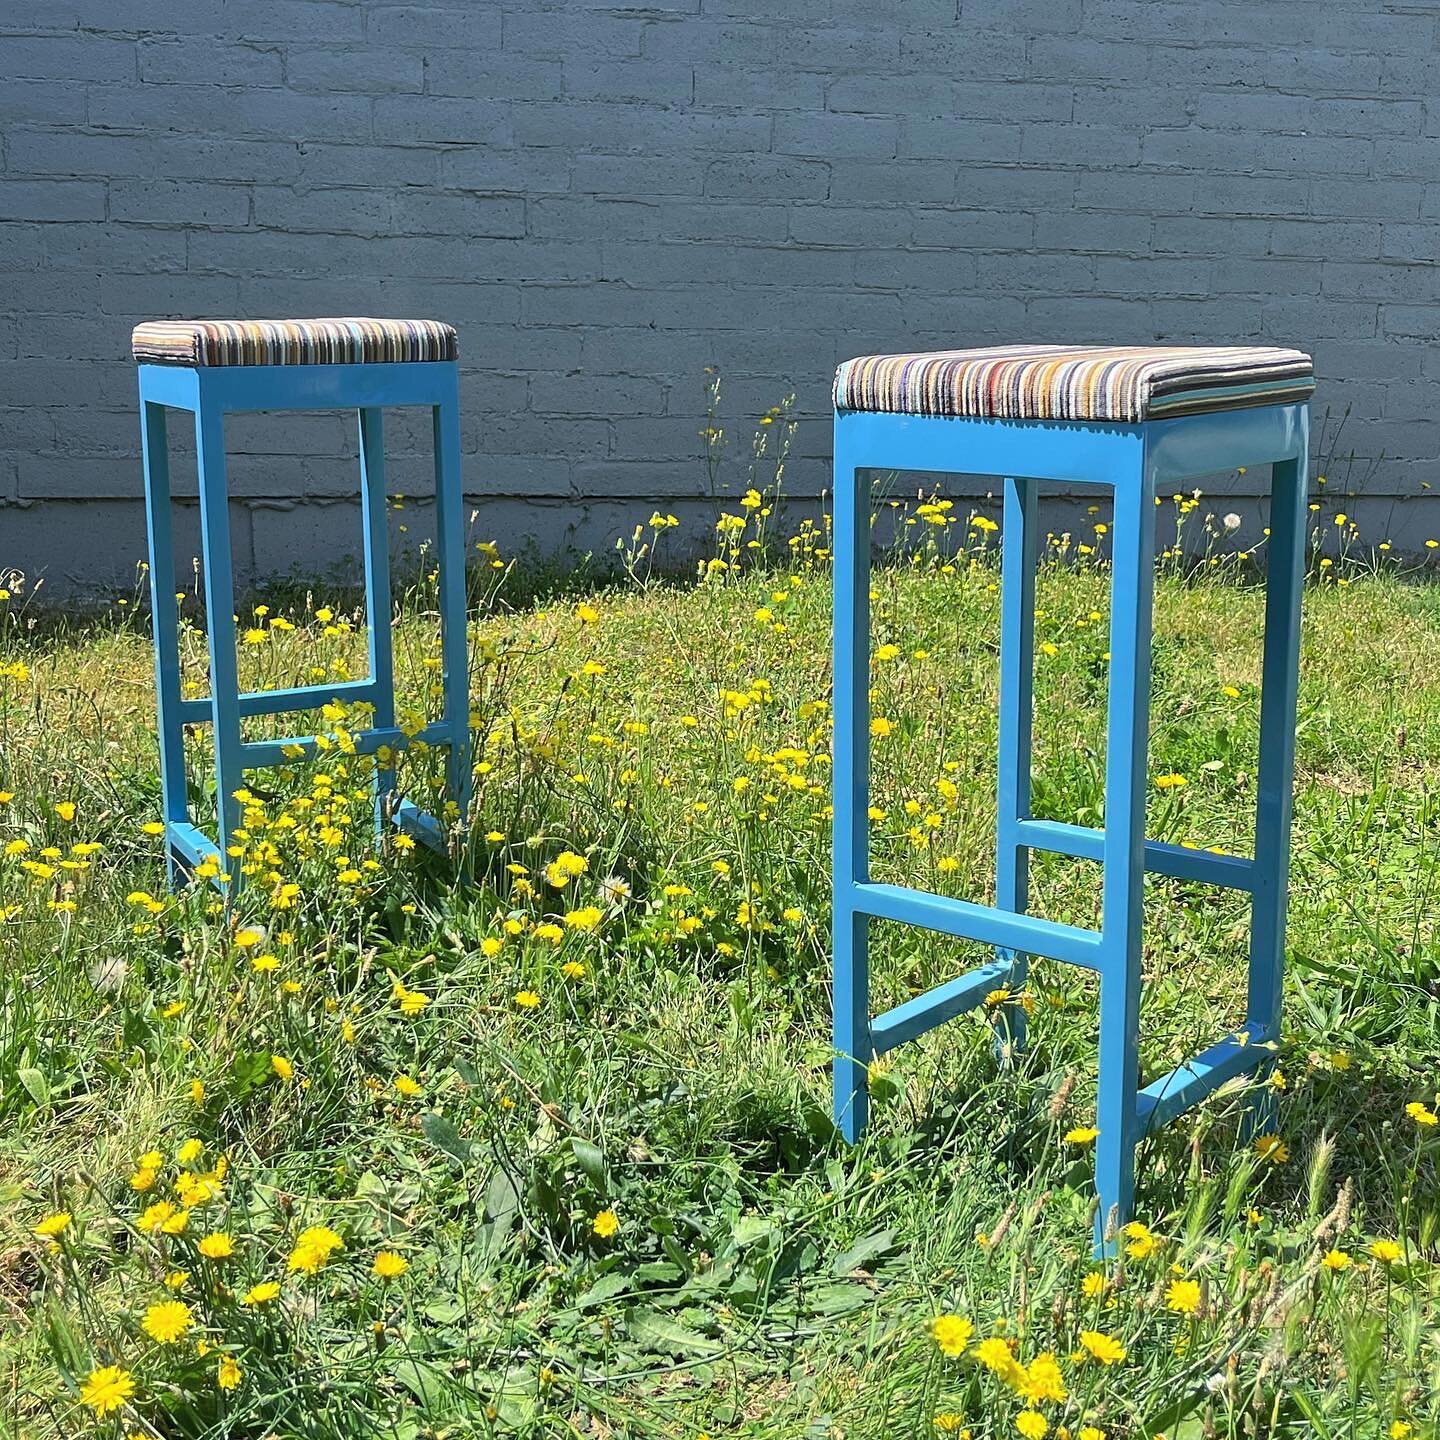 Happy dang Friday! This set of industrial steel barstools got a complete makeover including turquoise powder coating and new low profile seats covered in the most incredible corduroy by @maharamstudios. Turned the precious scrap into two lumbar pillo